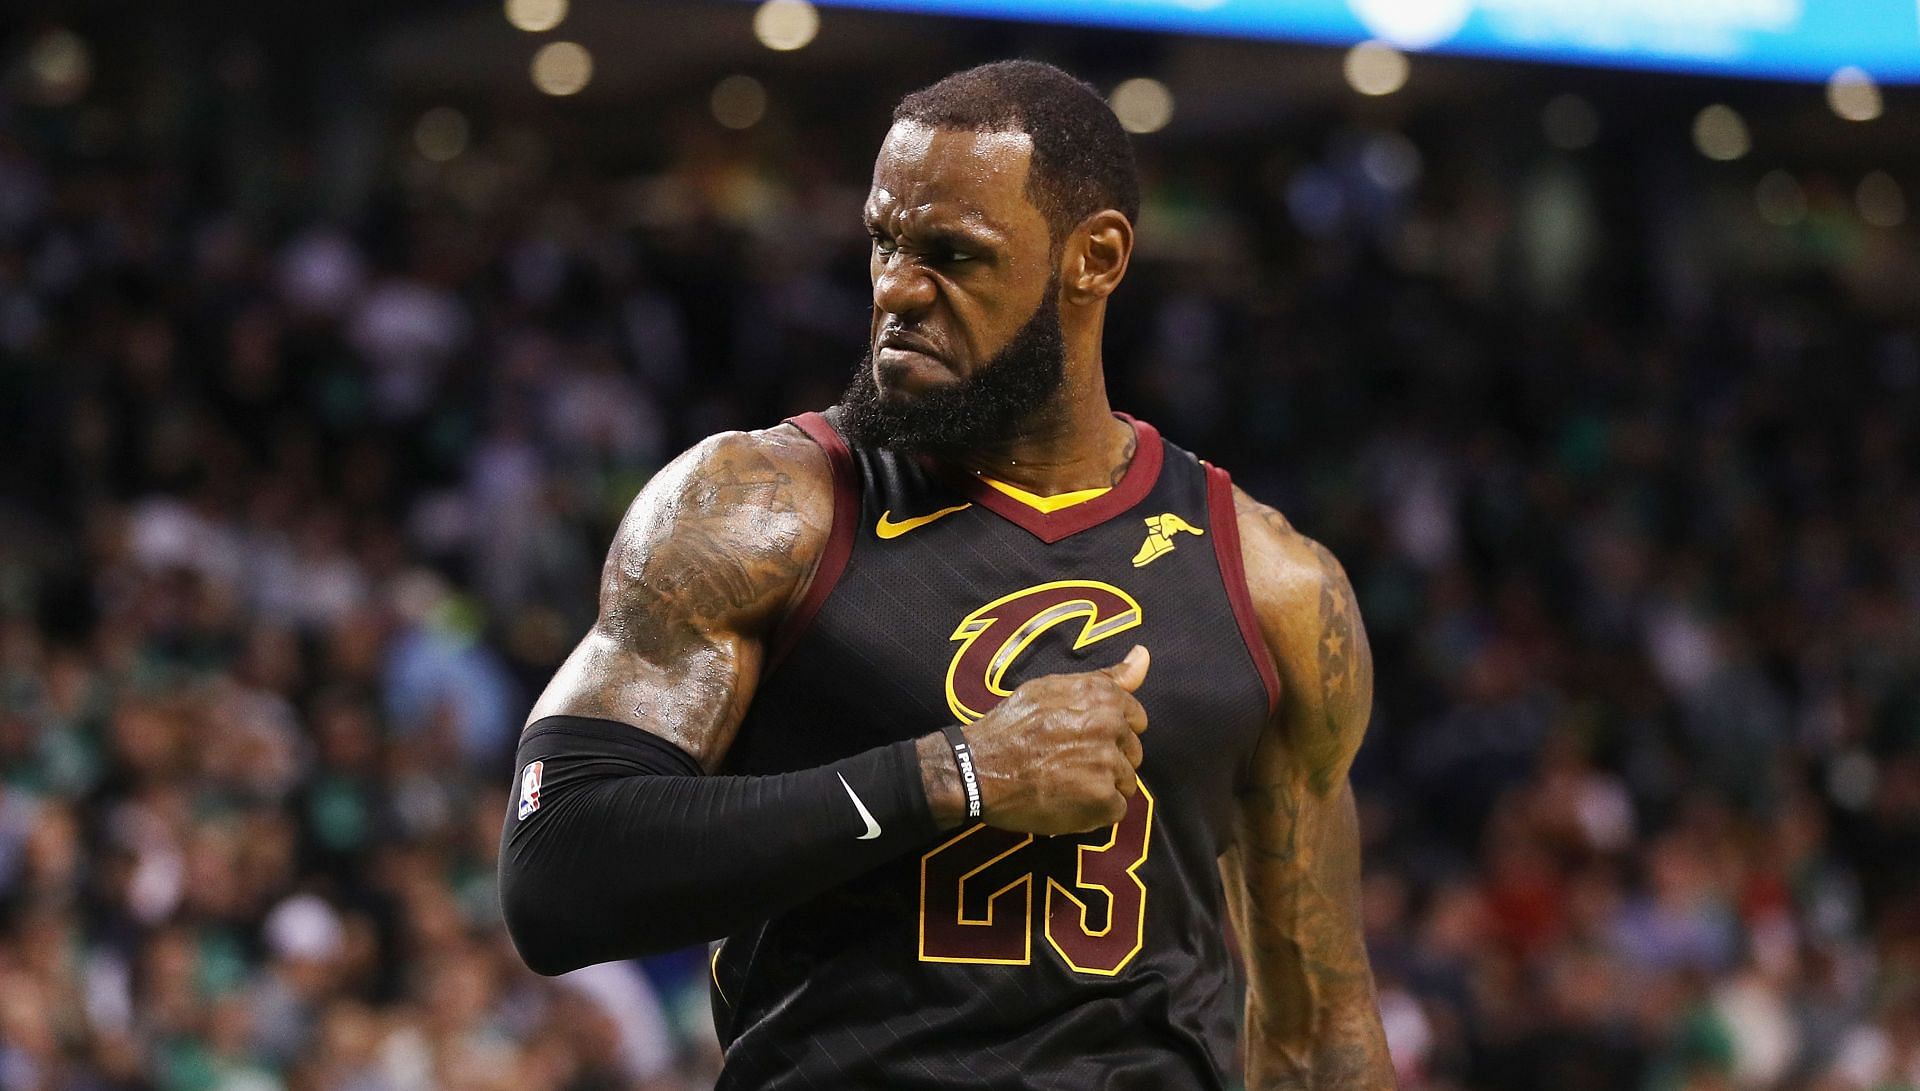 Stranger things have happened than the possibility of seeing LeBron James donning a Cleveland Cavaliers jersey again [Photo: Sport360]